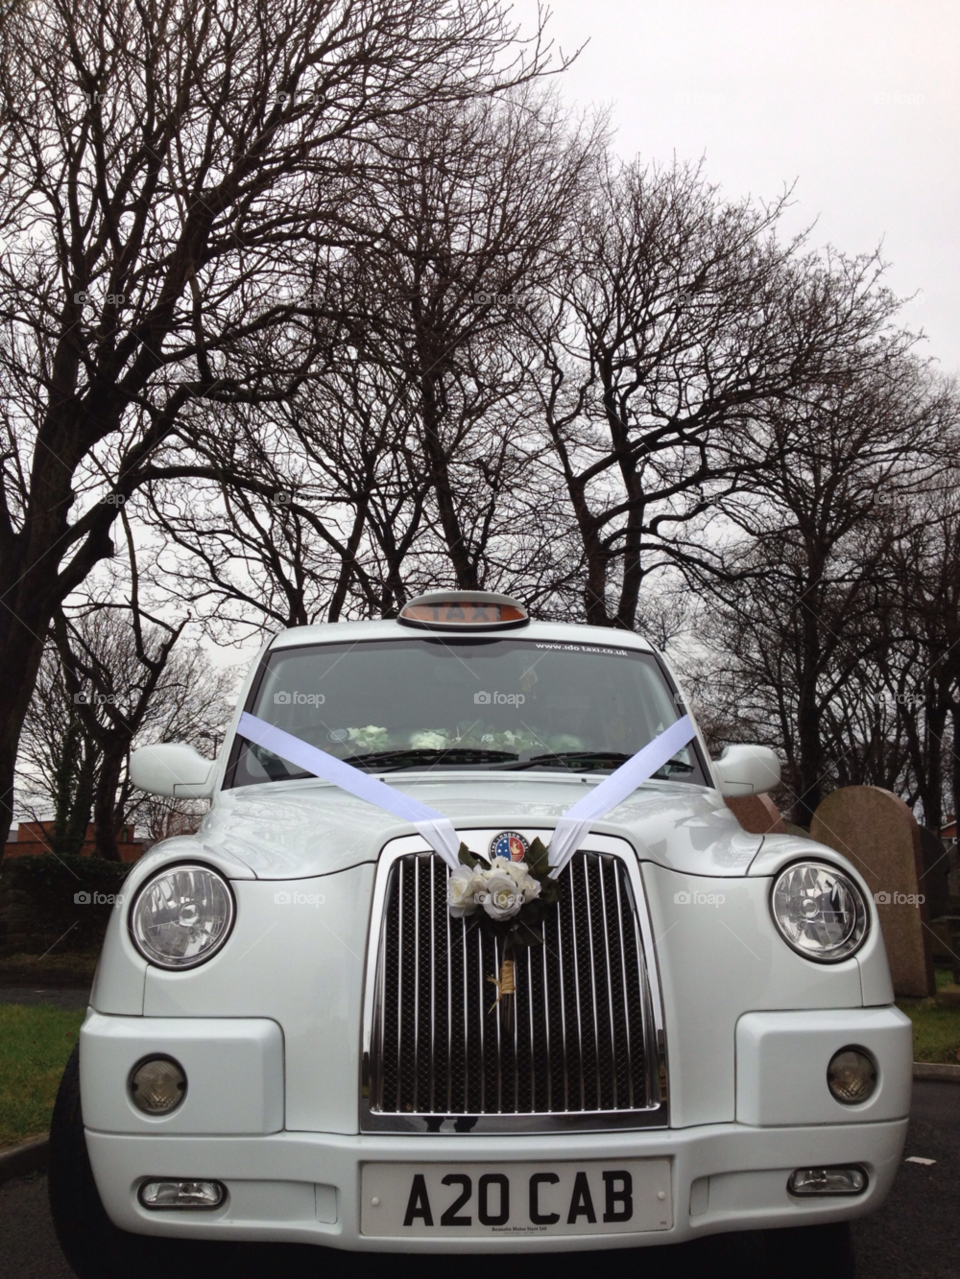 tree taxi wedding liverpool by idotaxi